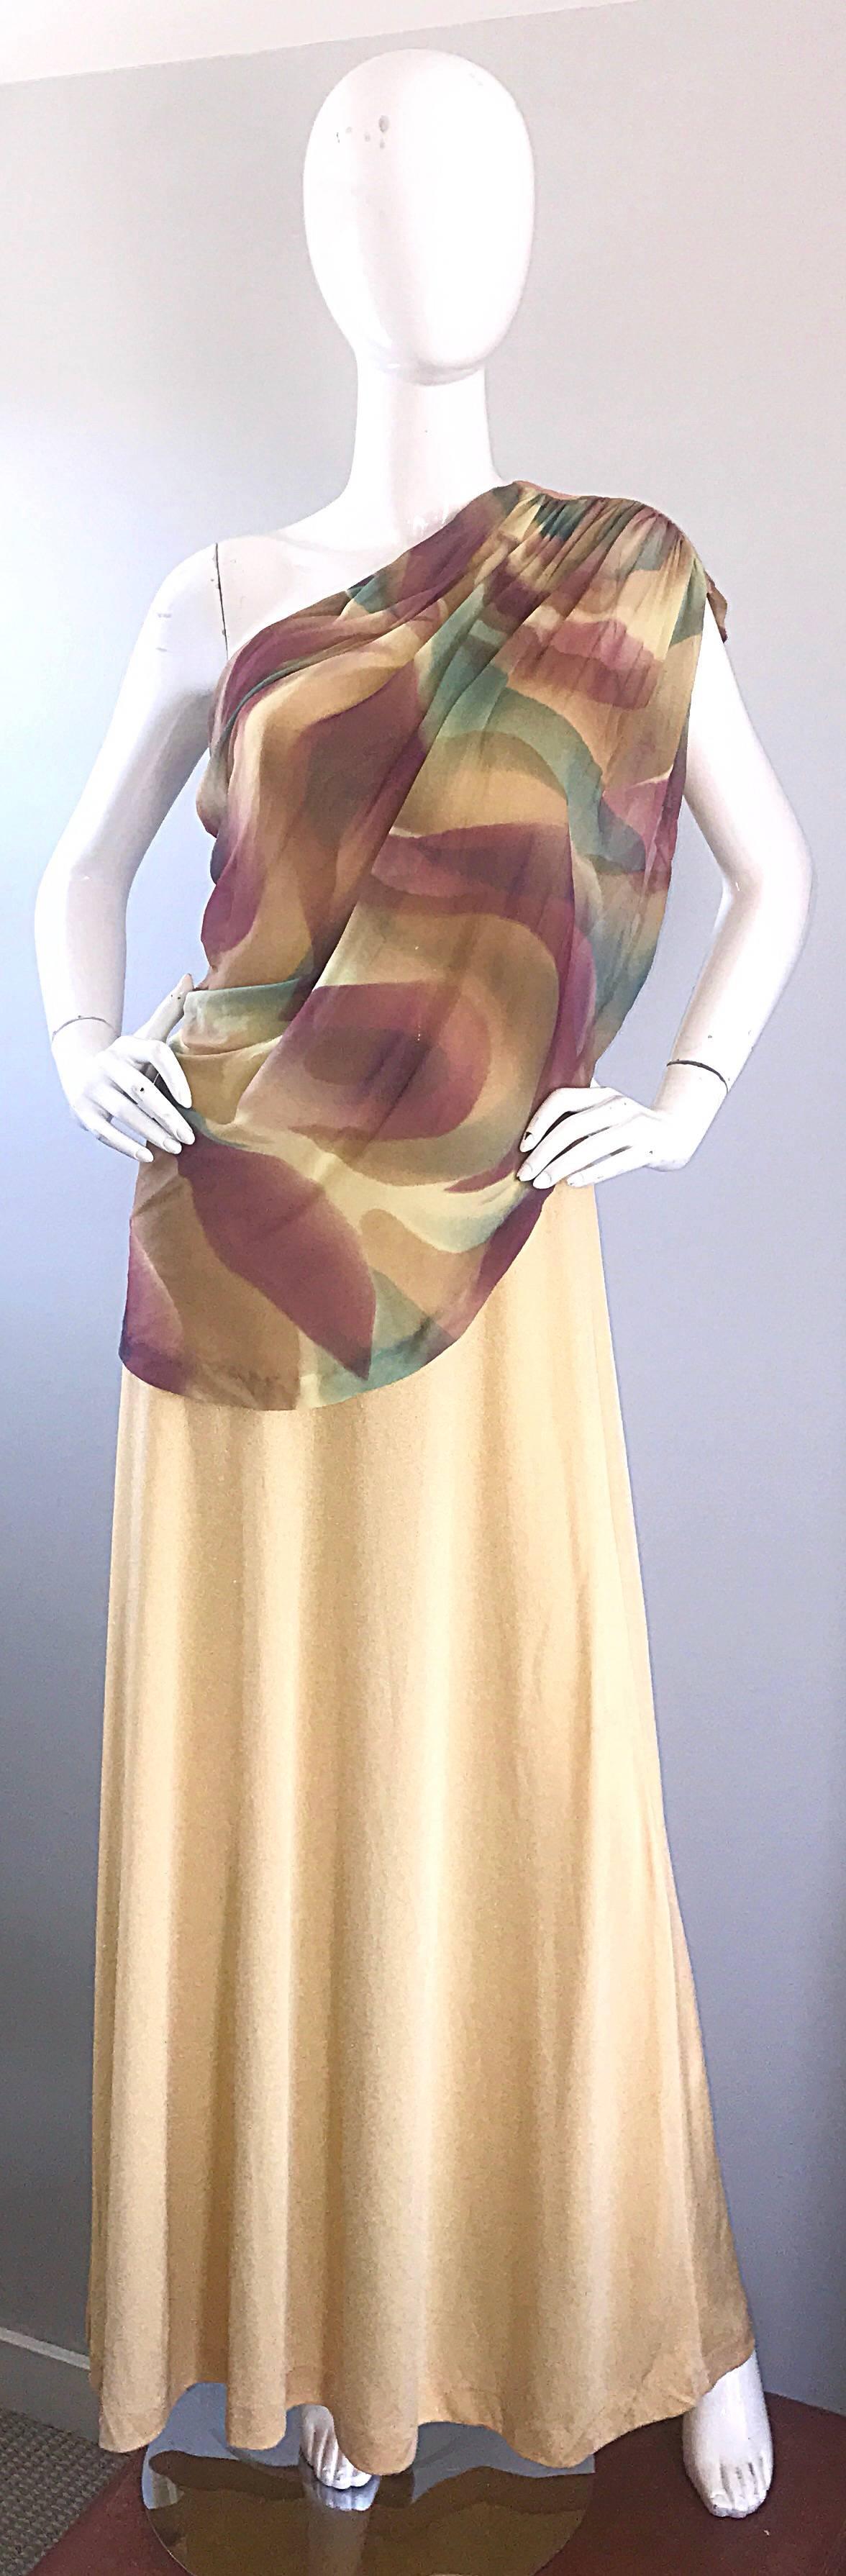 Unbelievable 1970s JOY STEVENS one shoulder Grecian gown! Features a golden jersey body with plenty of stretch. Chiffon overlay features purple, green and gold abstract print. Hidden zipper up the side with hook-and-eye closure. Great with sandals